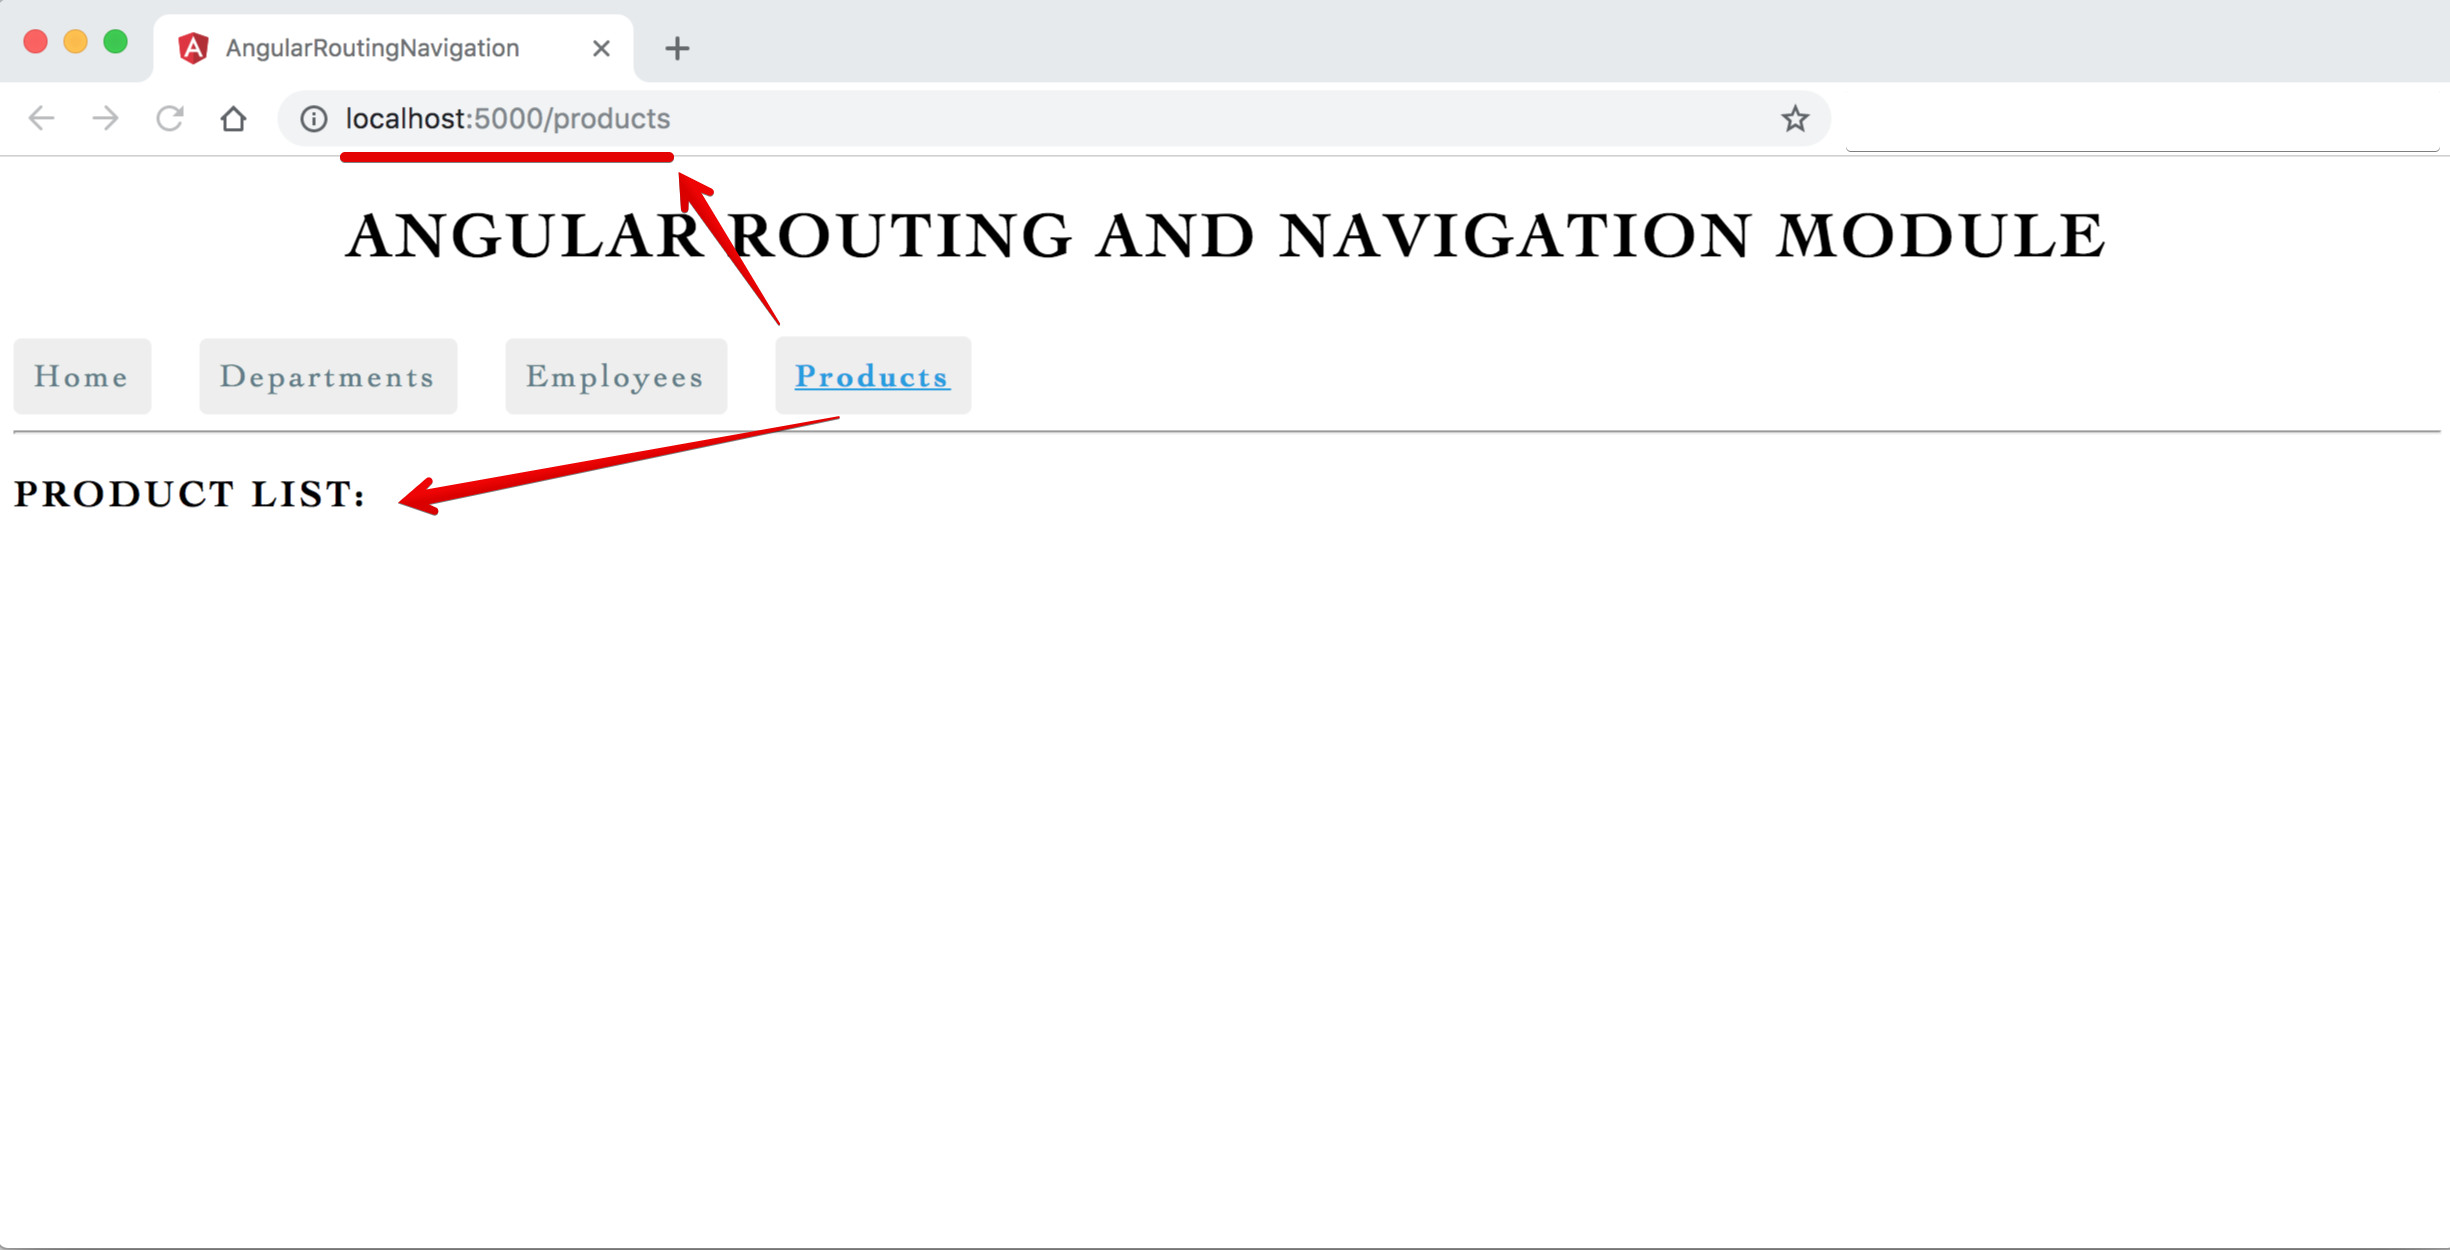 Image - Output - Angular Single Page Application (SPA) with Routing Navigation - Products View